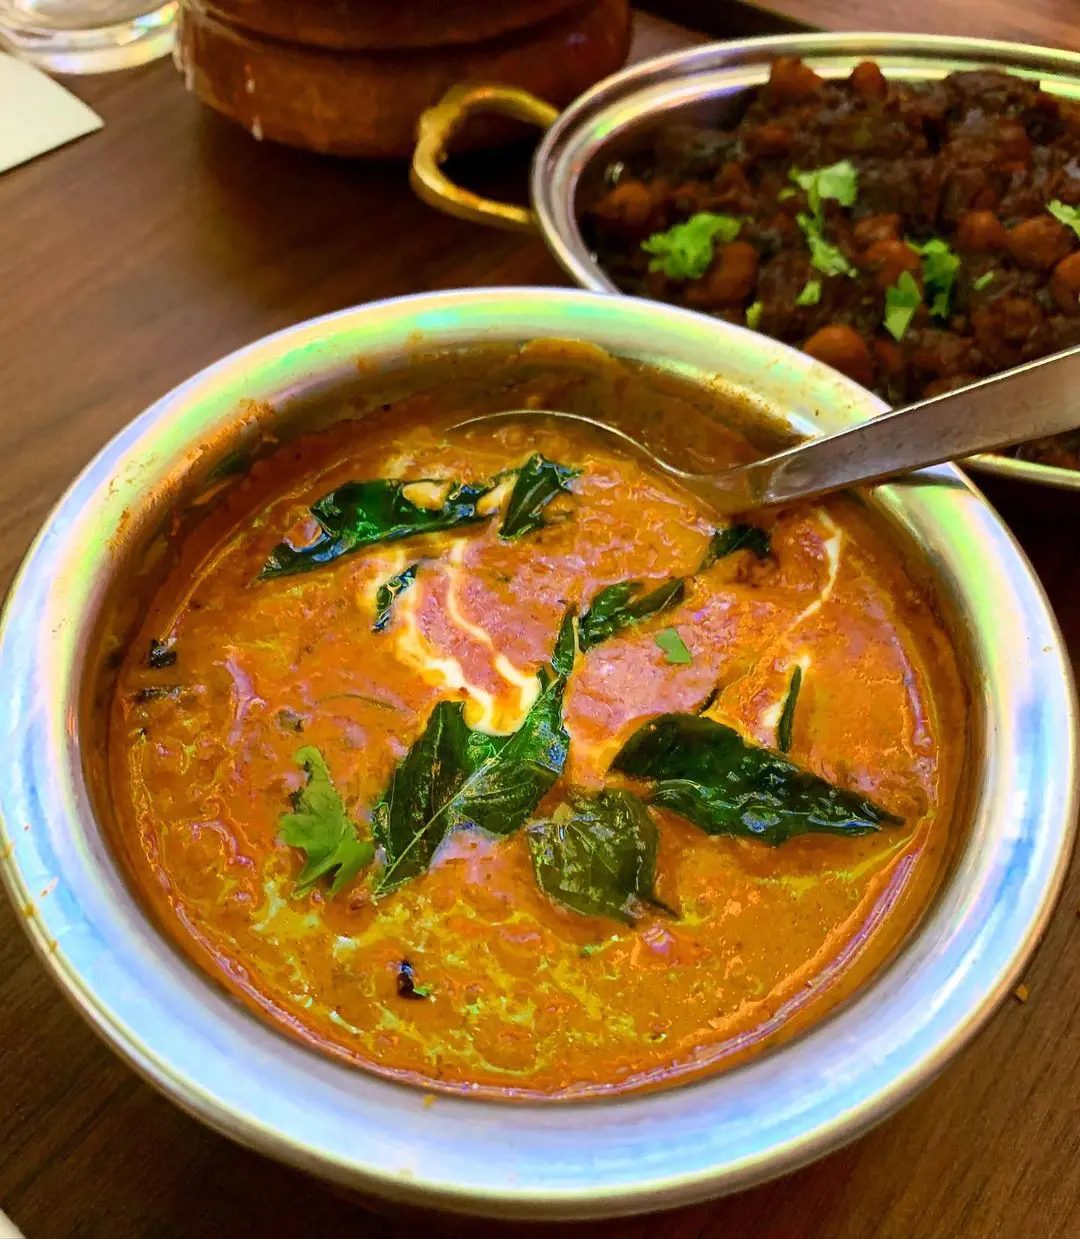 Malabar fish curry is one of the most popular dishes in South India